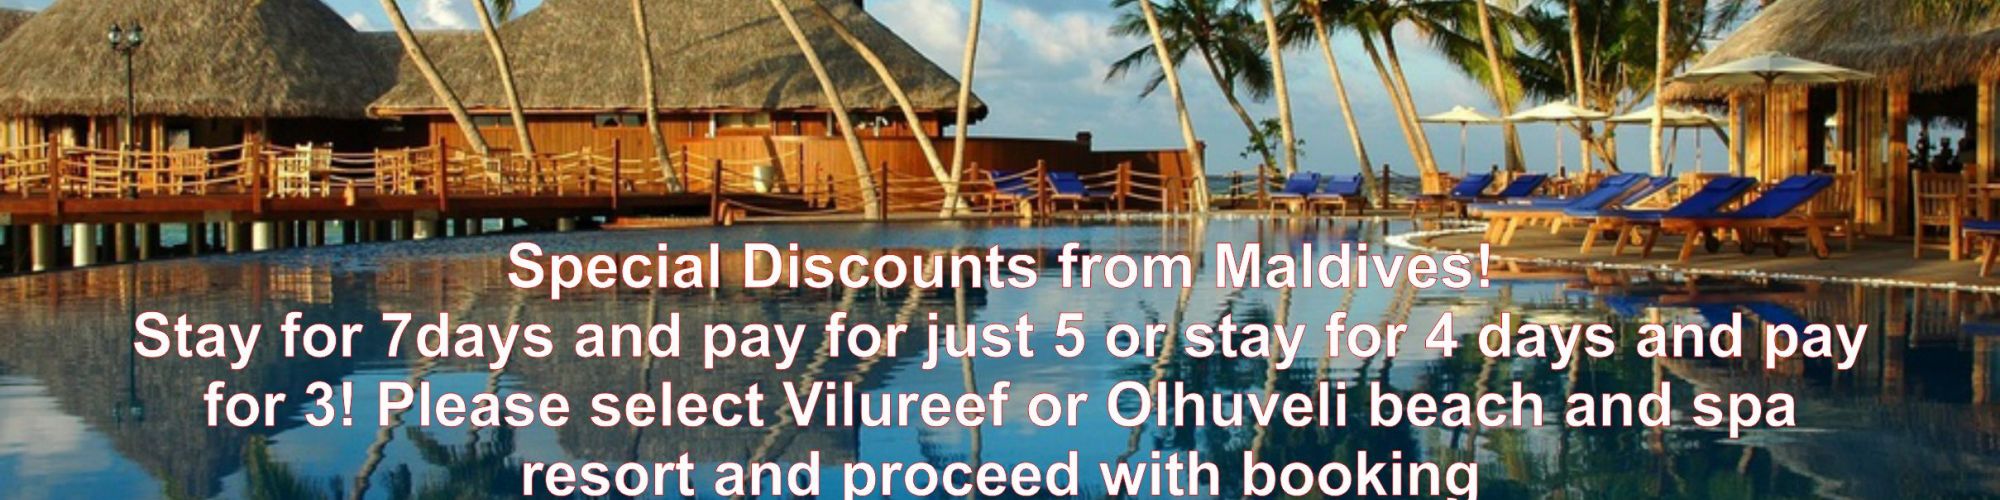 Amazing summer holiday deals from Maldives